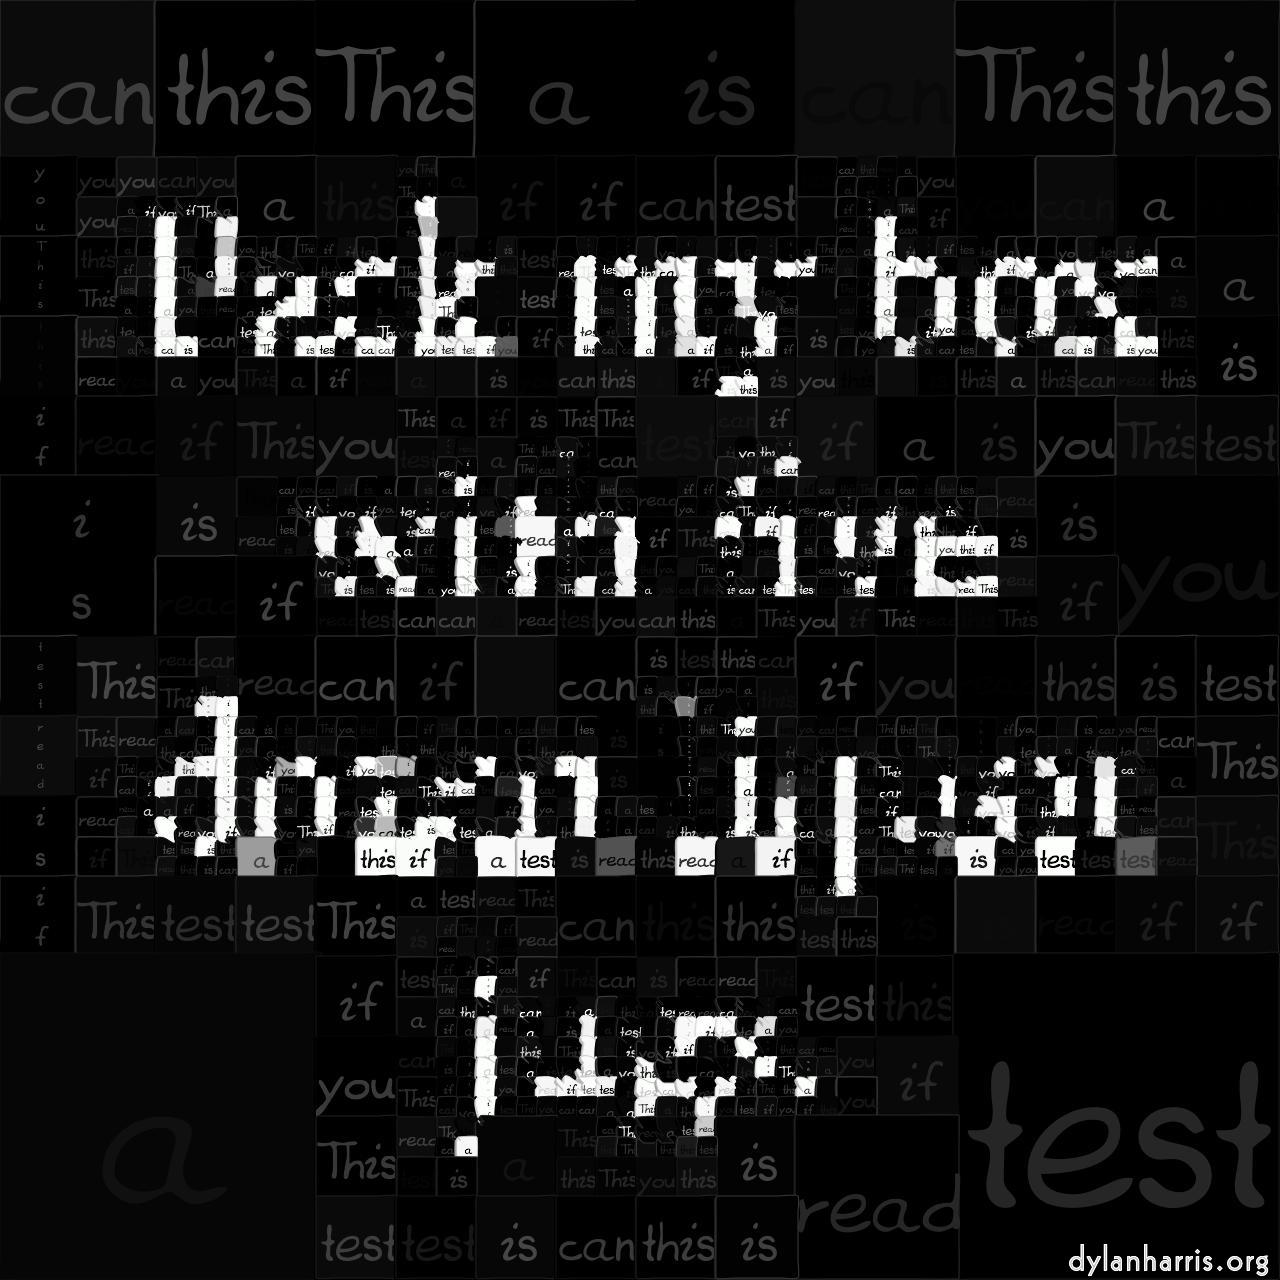 image: mosaic with text :: text with texture